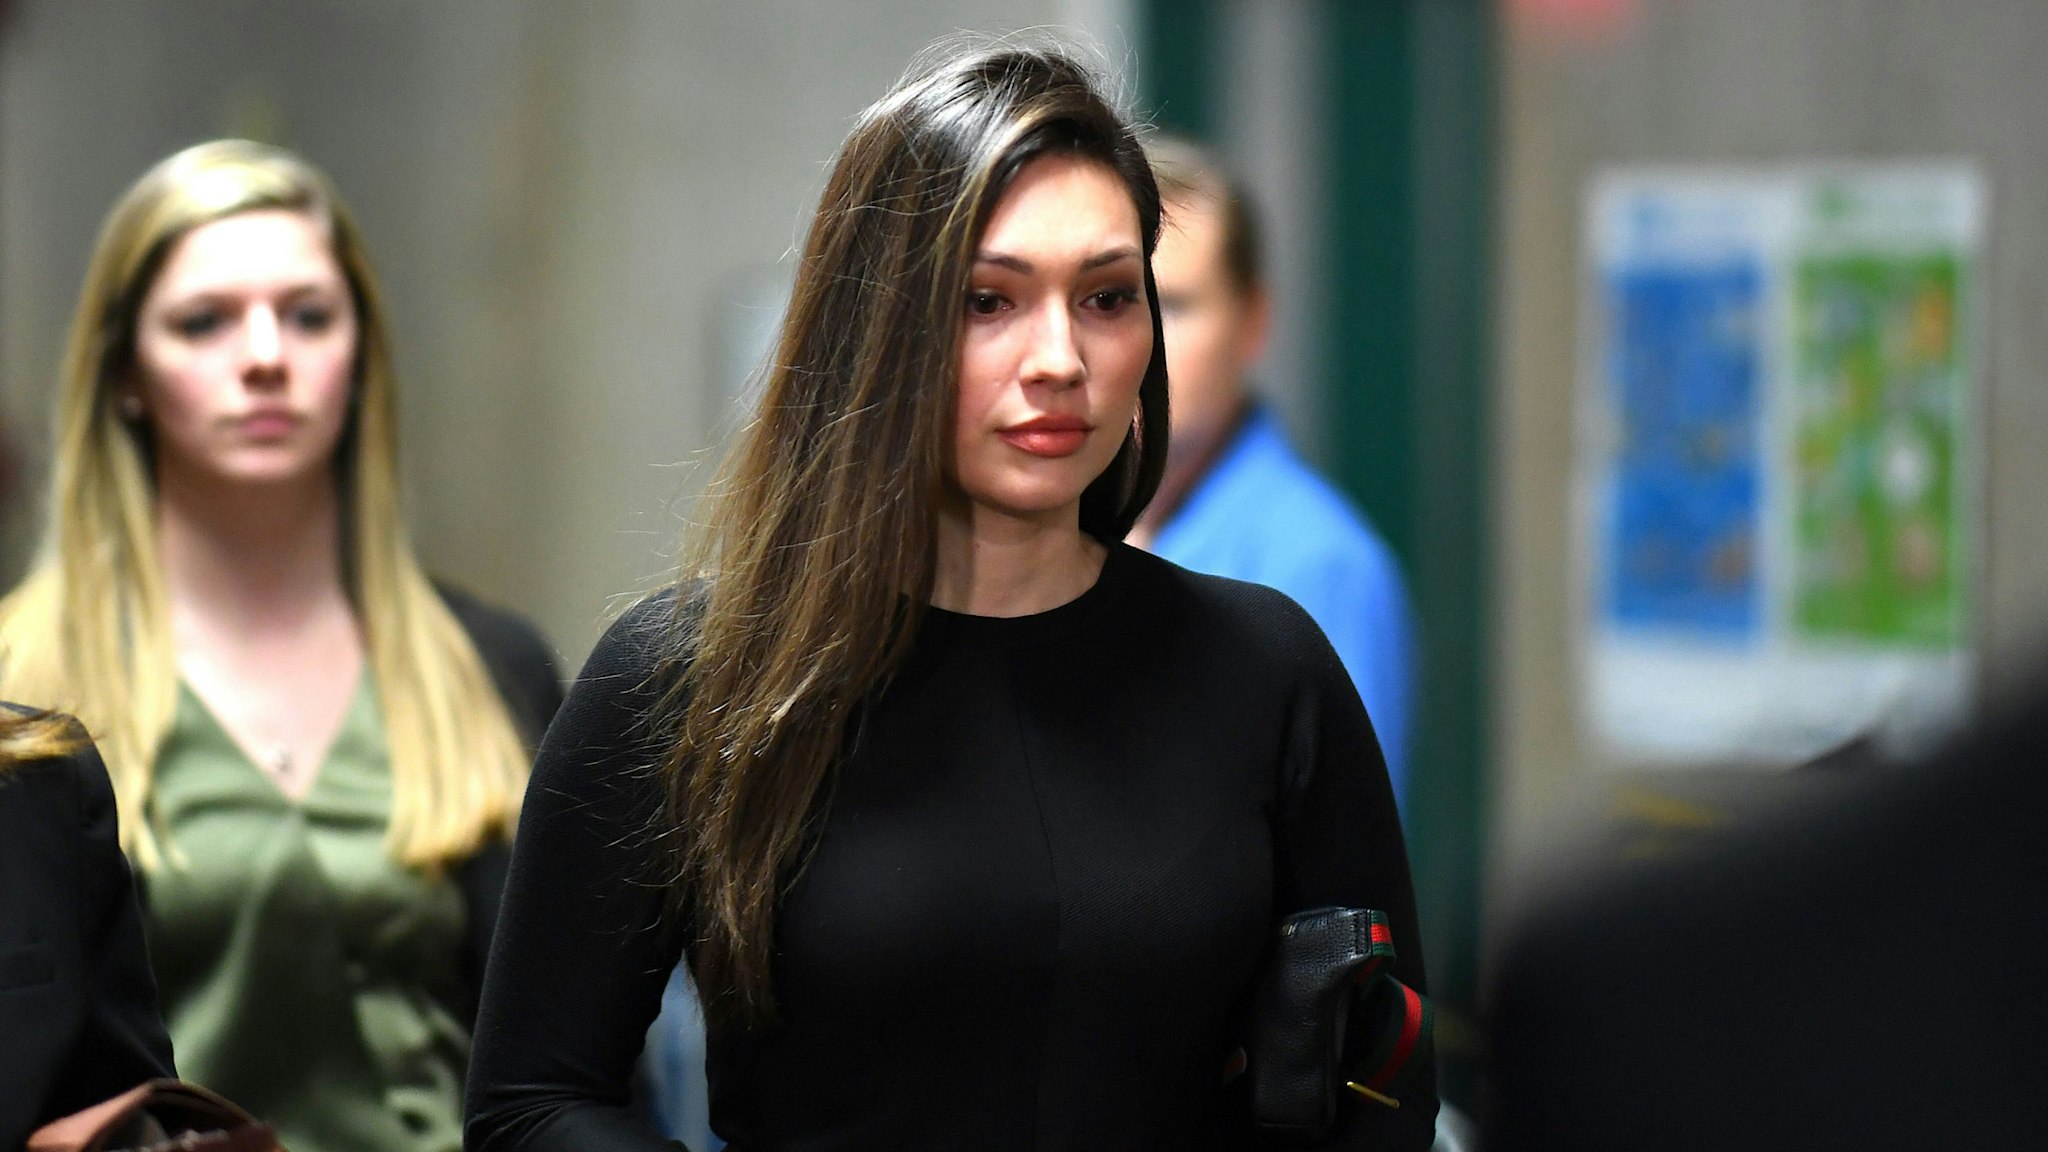 Former Actress Jessica Mann arrives for the trial of Harvey Weinstein at the Manhattan Criminal Court, on January 31, 2020 in New York City.